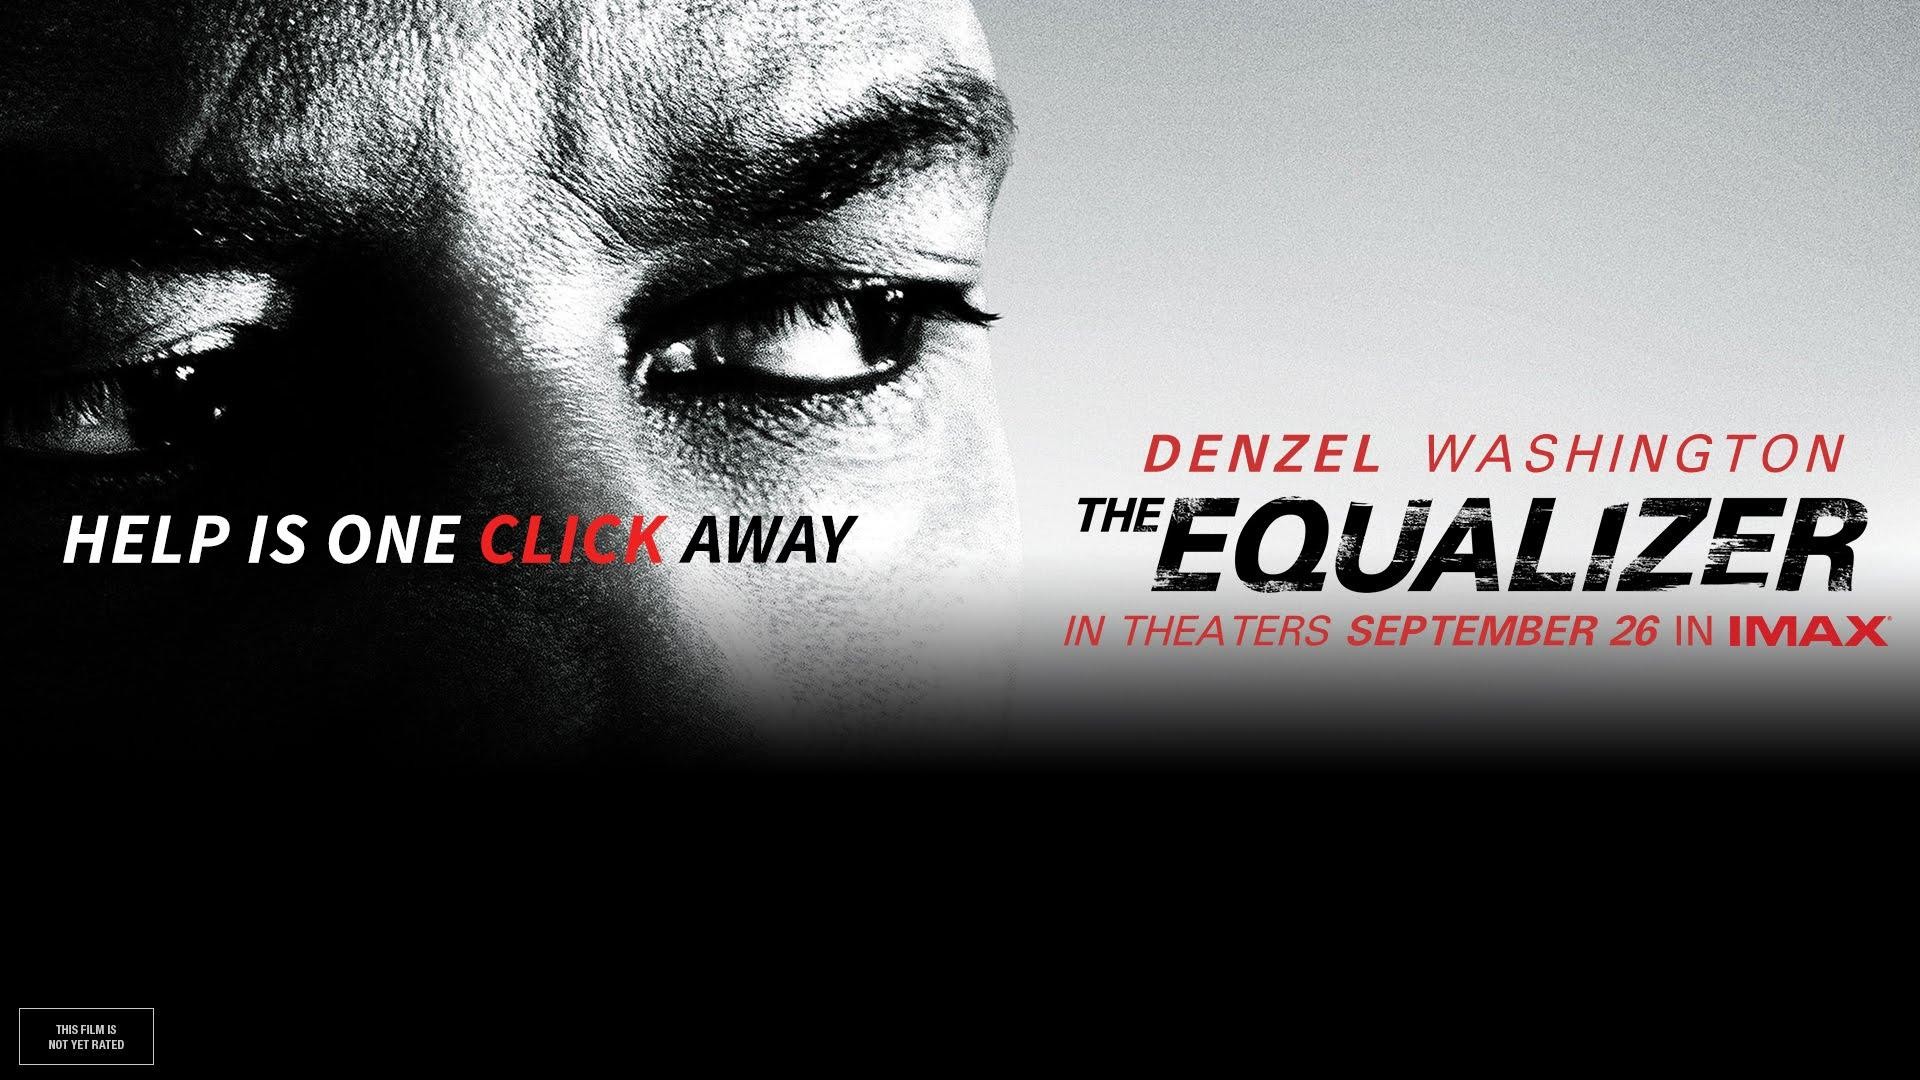 1920x1080 The Equalizer widescreen wallpapers The Equalizer Wallpapers hd